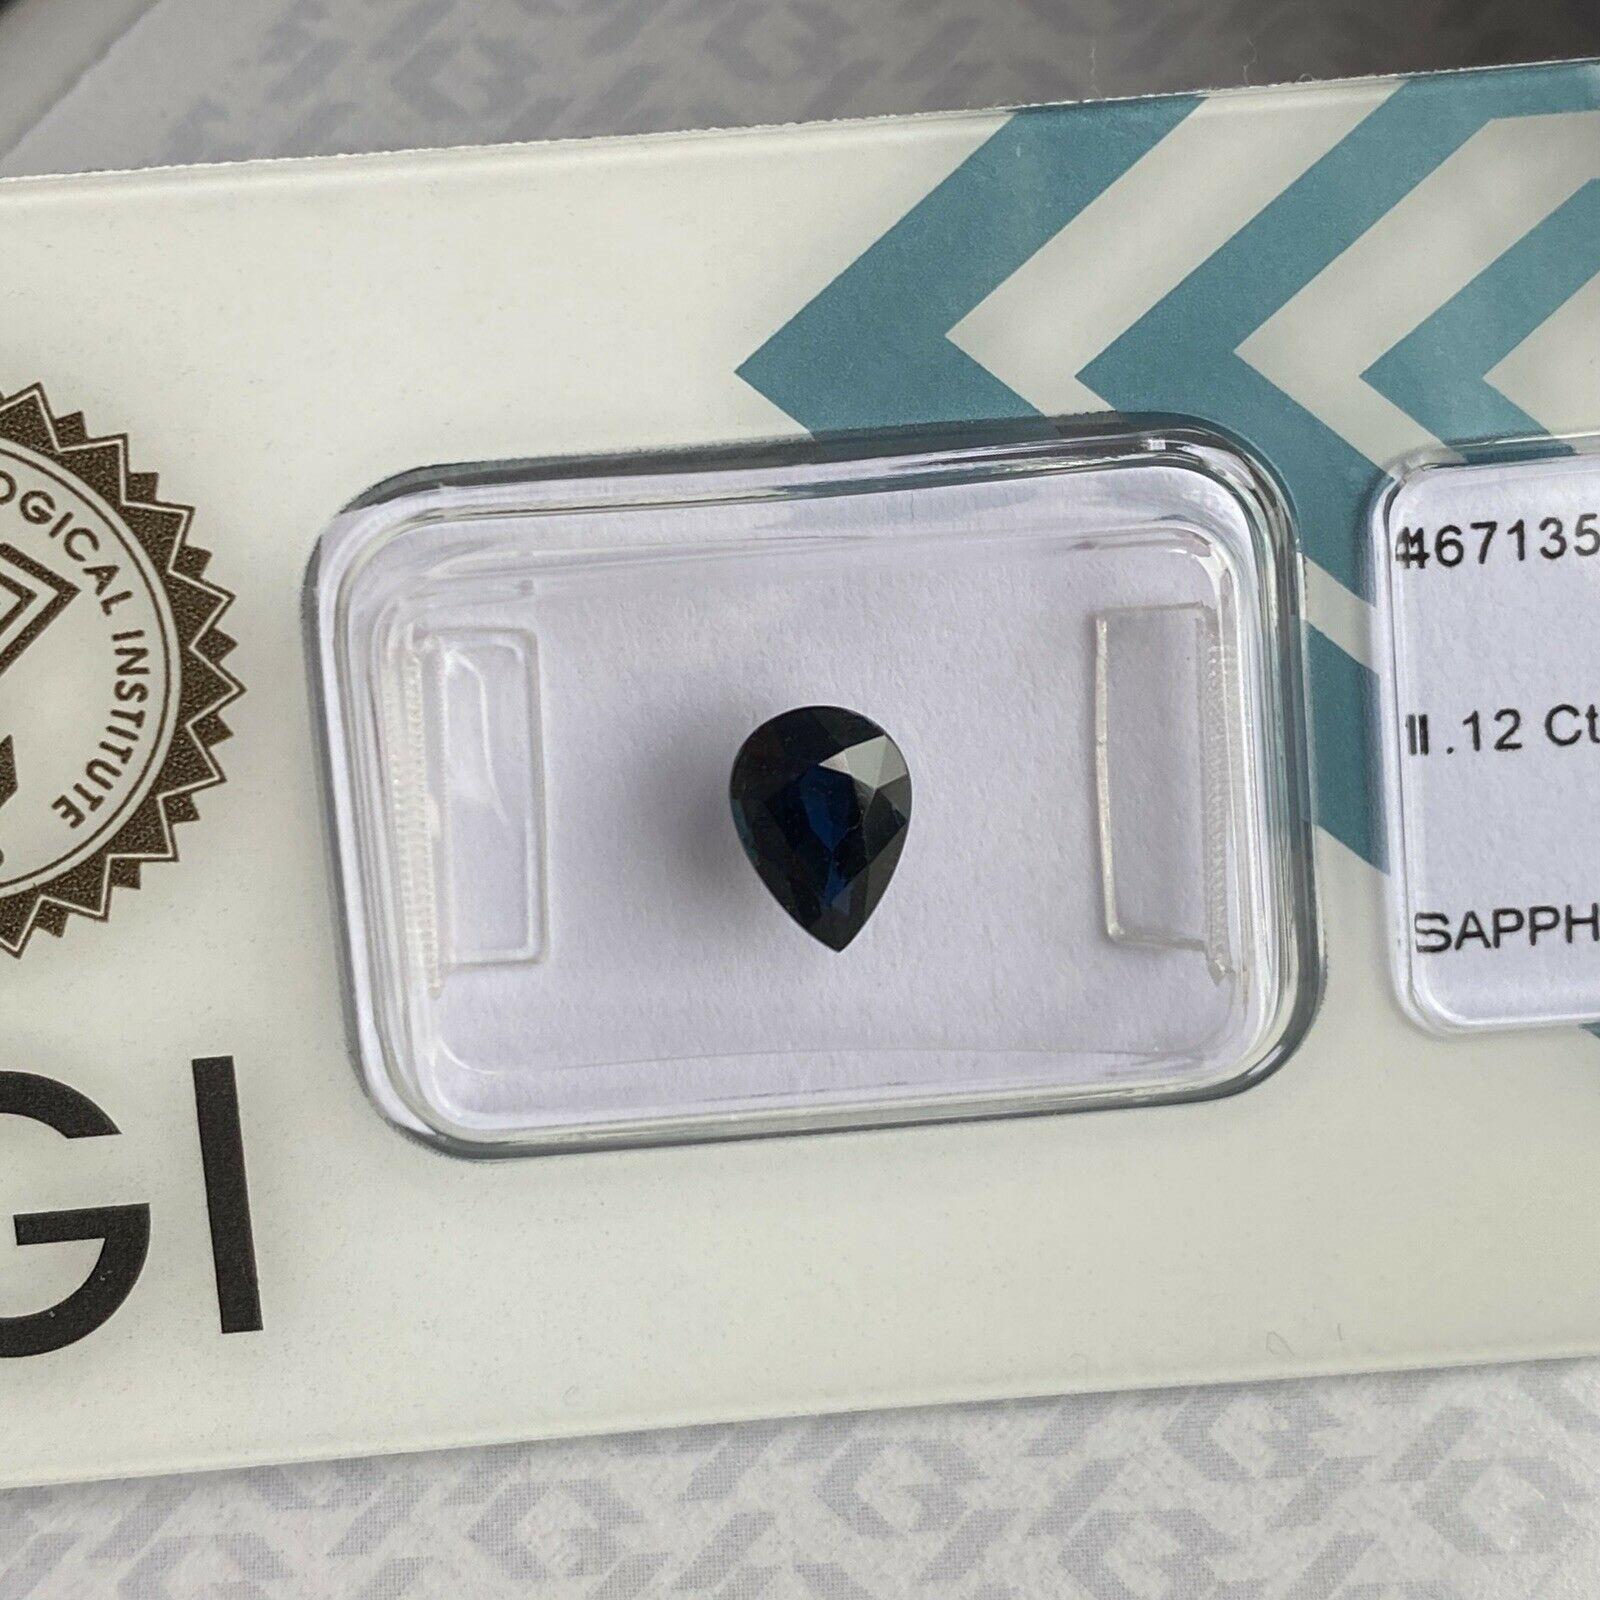 1.12ct Deep 0Blue Sapphire Pear Teardrop Cut IGI Certified Loose Rare Gem

Deep Blue Sapphire In IGI Blister. 
1.12 Carat with an excellent pear cut and very good clarity, a clean stone with only some small natural inclusions visible when looking